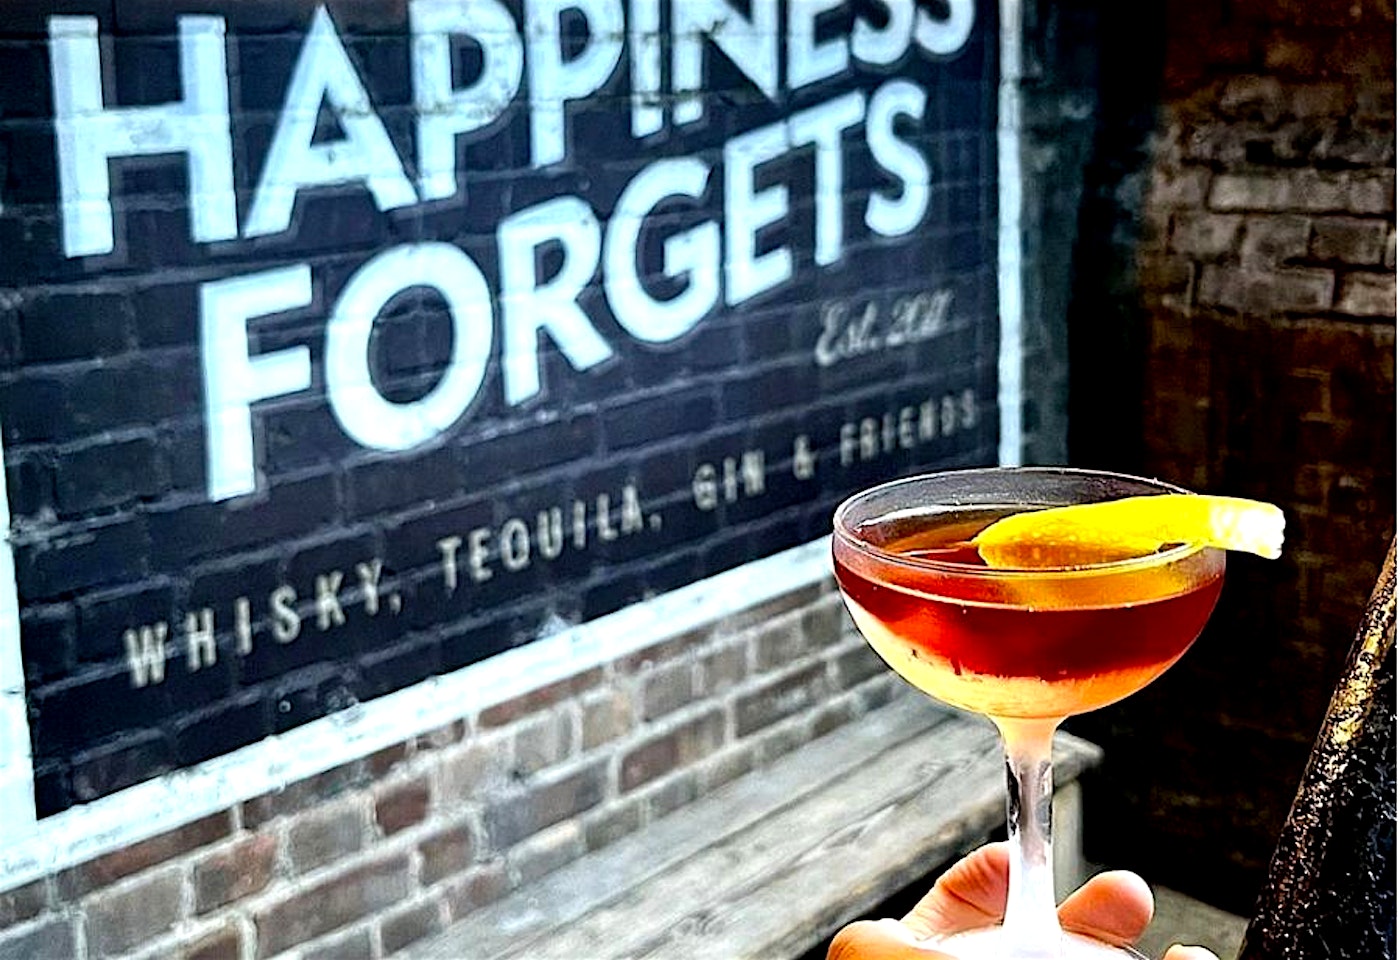 happiness forgets shoreditch cocktail bars 3